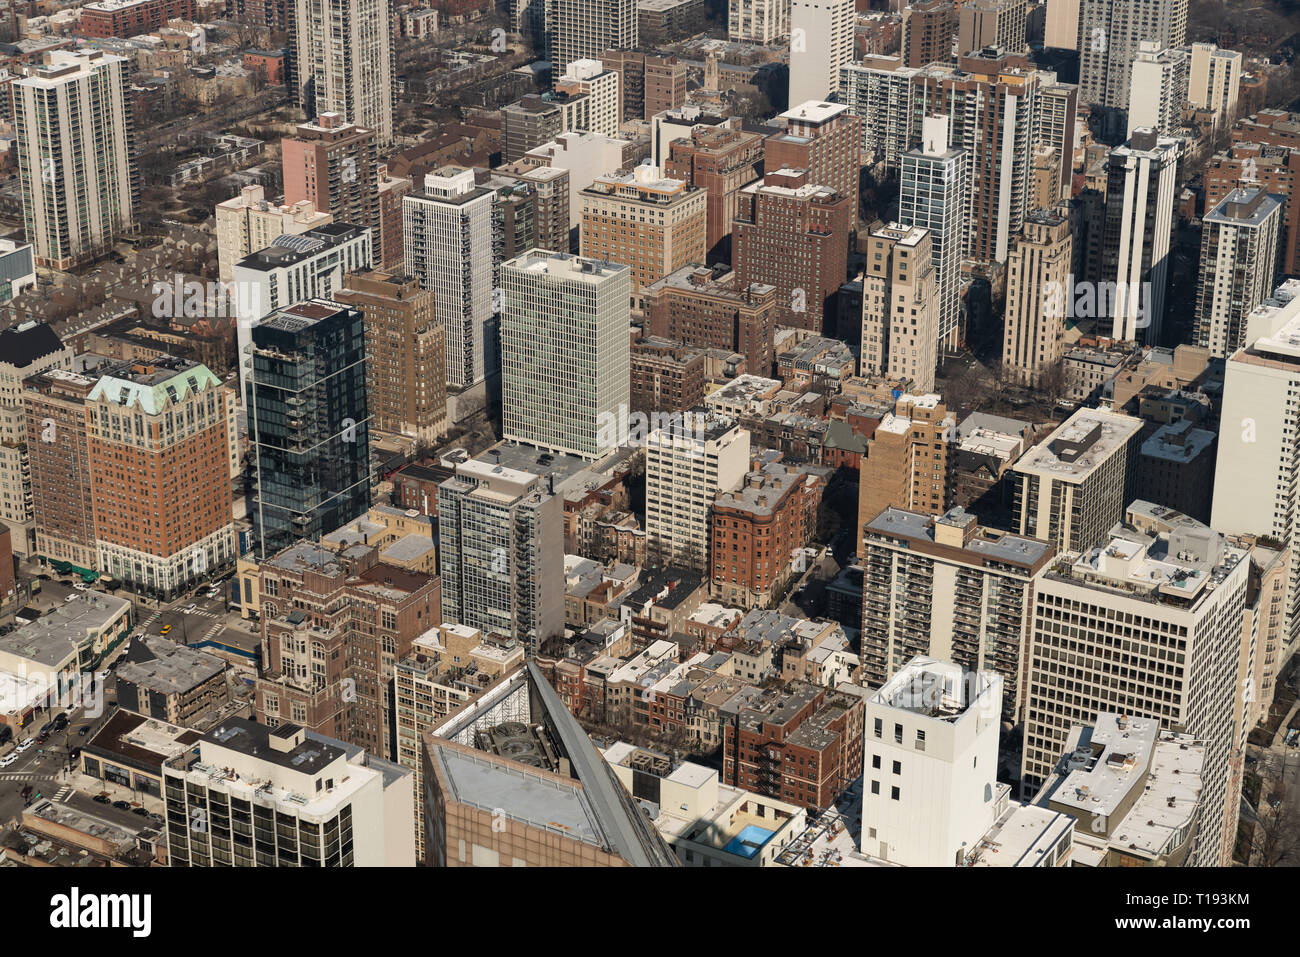 Cityscape aerial view of Chicago city residential or downtown district. American life, or midwest building exterior architecture concept Stock Photo